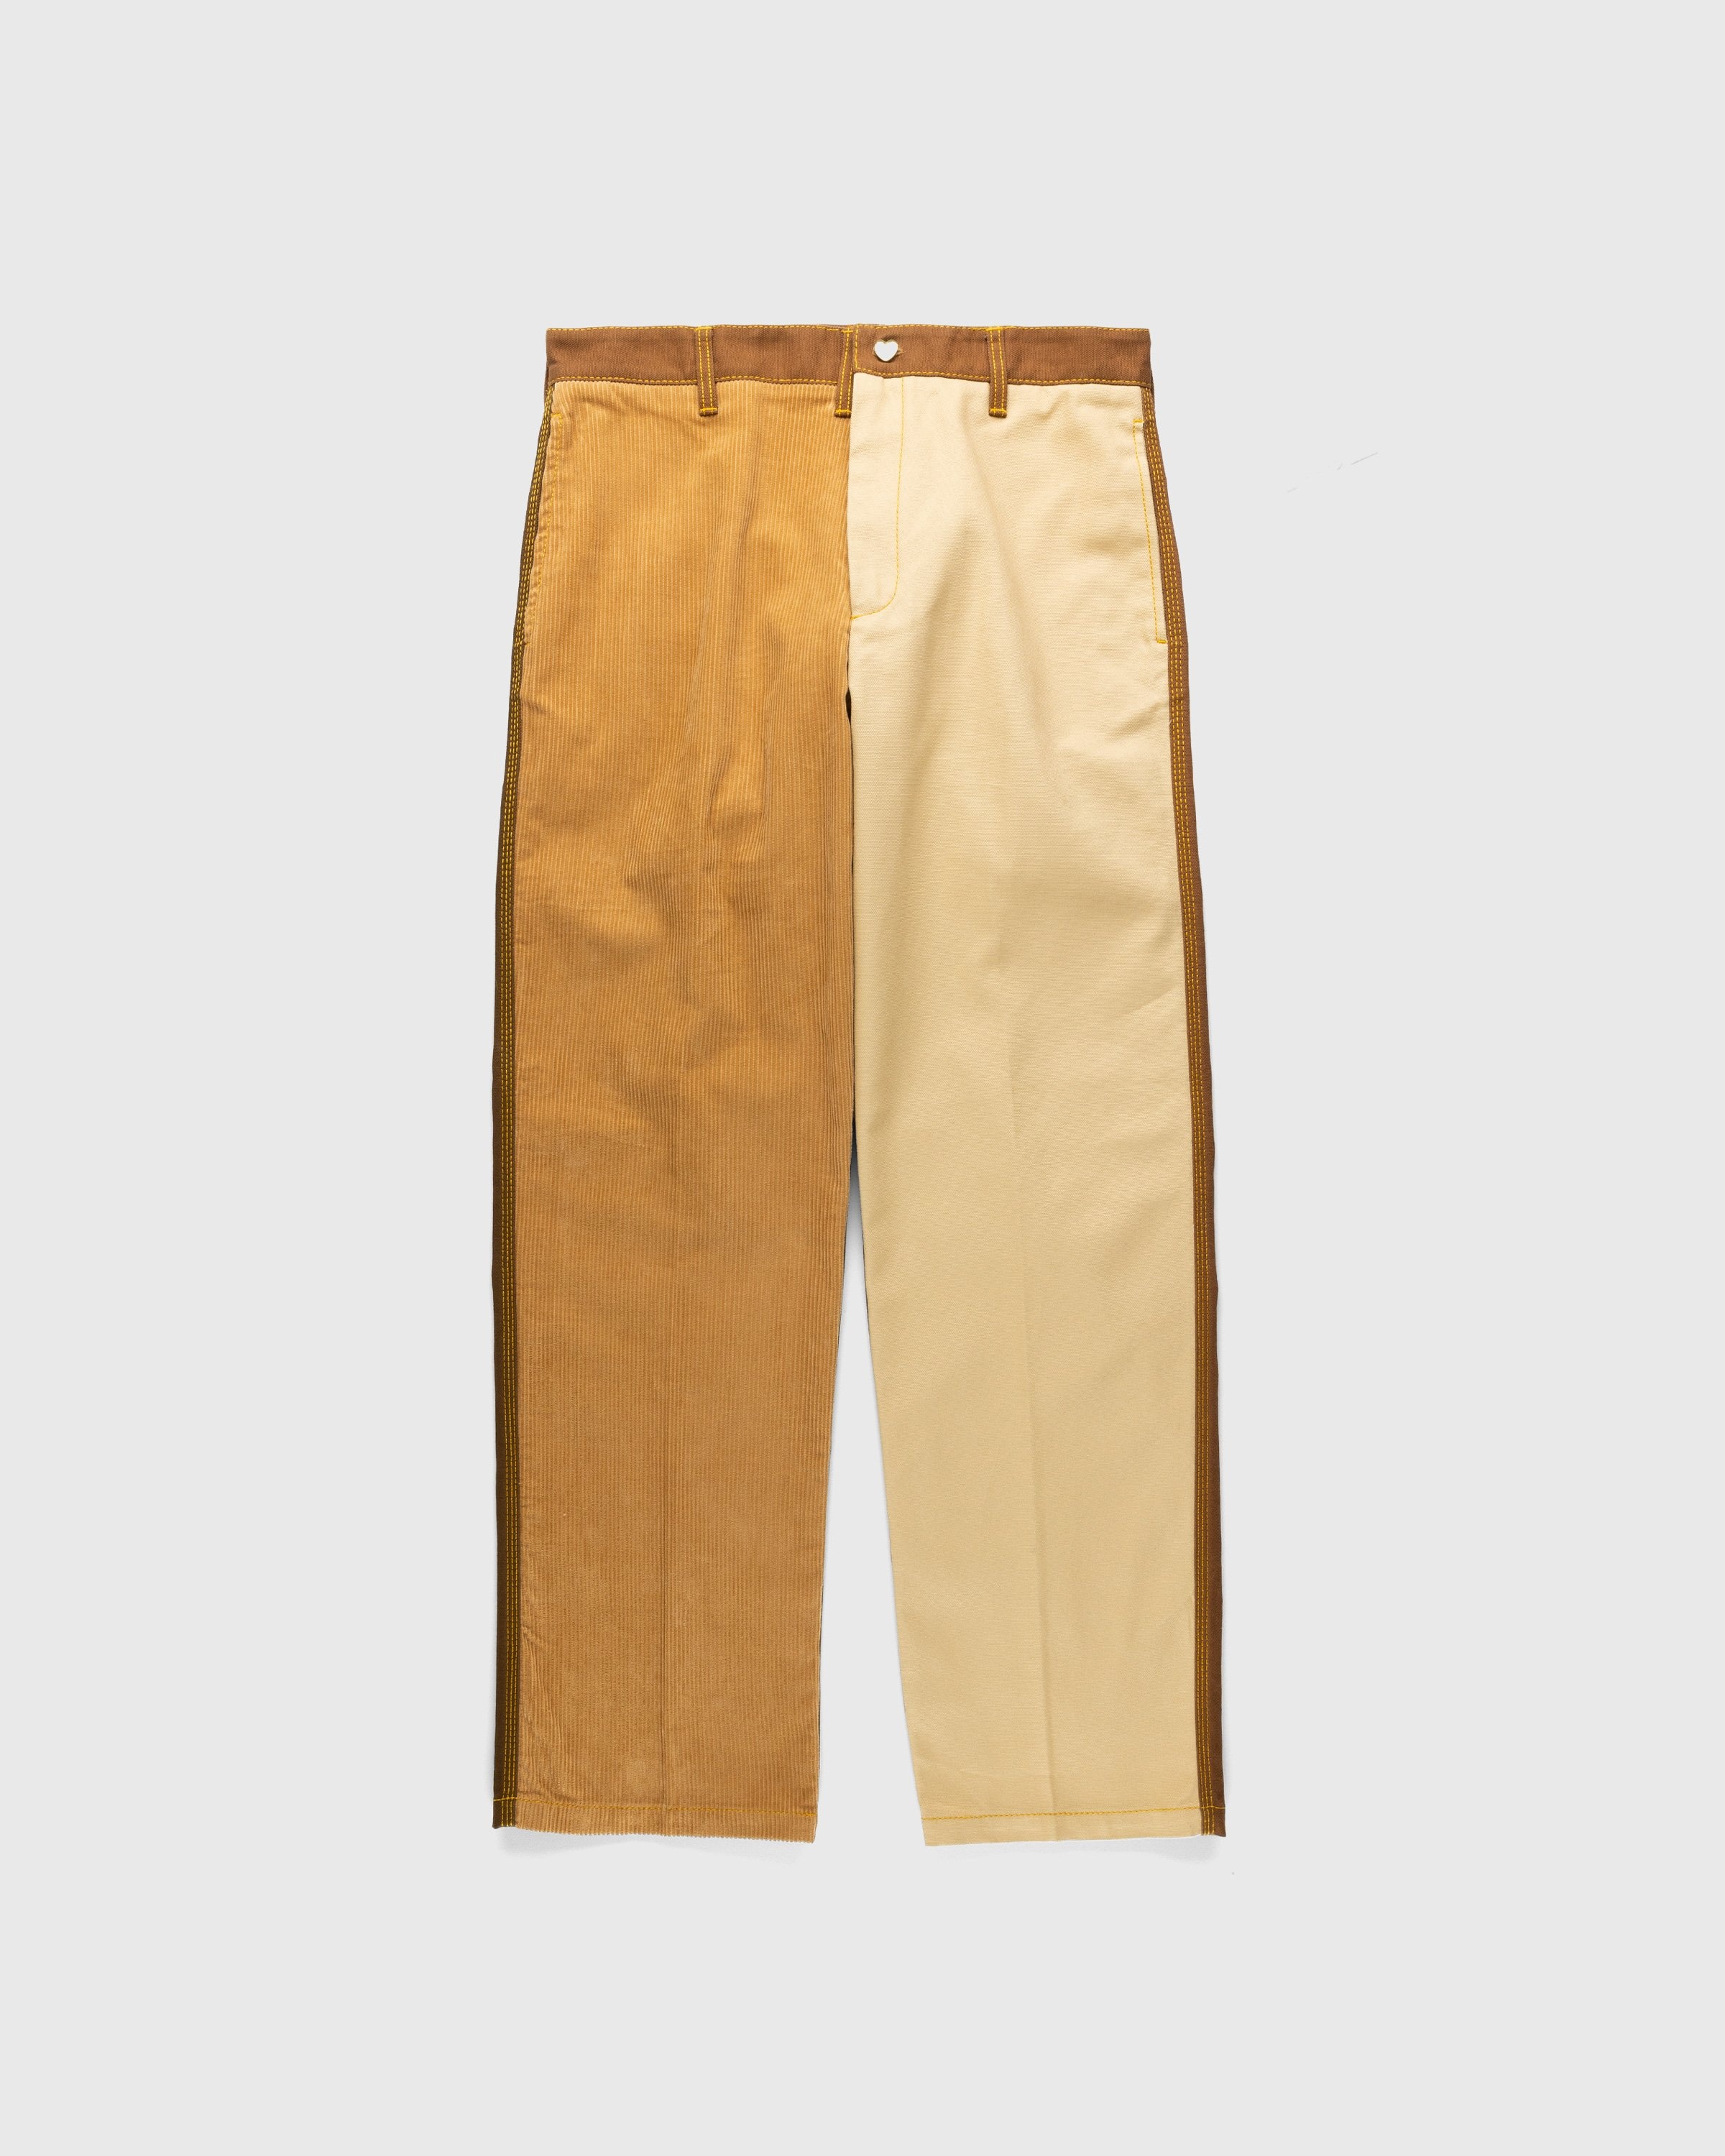 Marni x Carhartt WIP – Colorblocked Trousers Brown - Trousers - Brown - Image 1